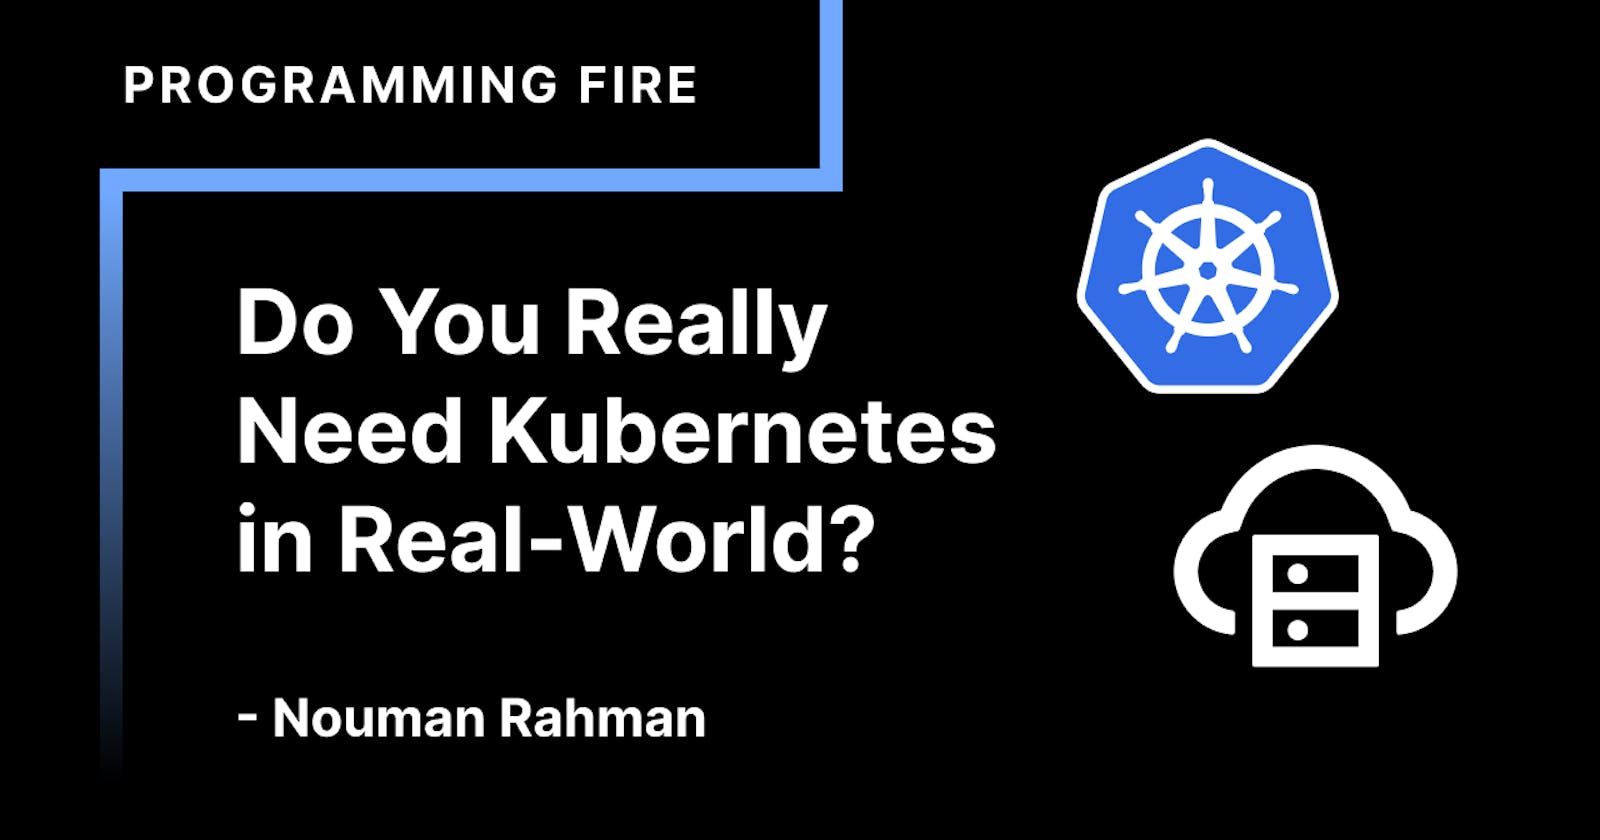 Do You Really Need Kubernetes in Real-World?